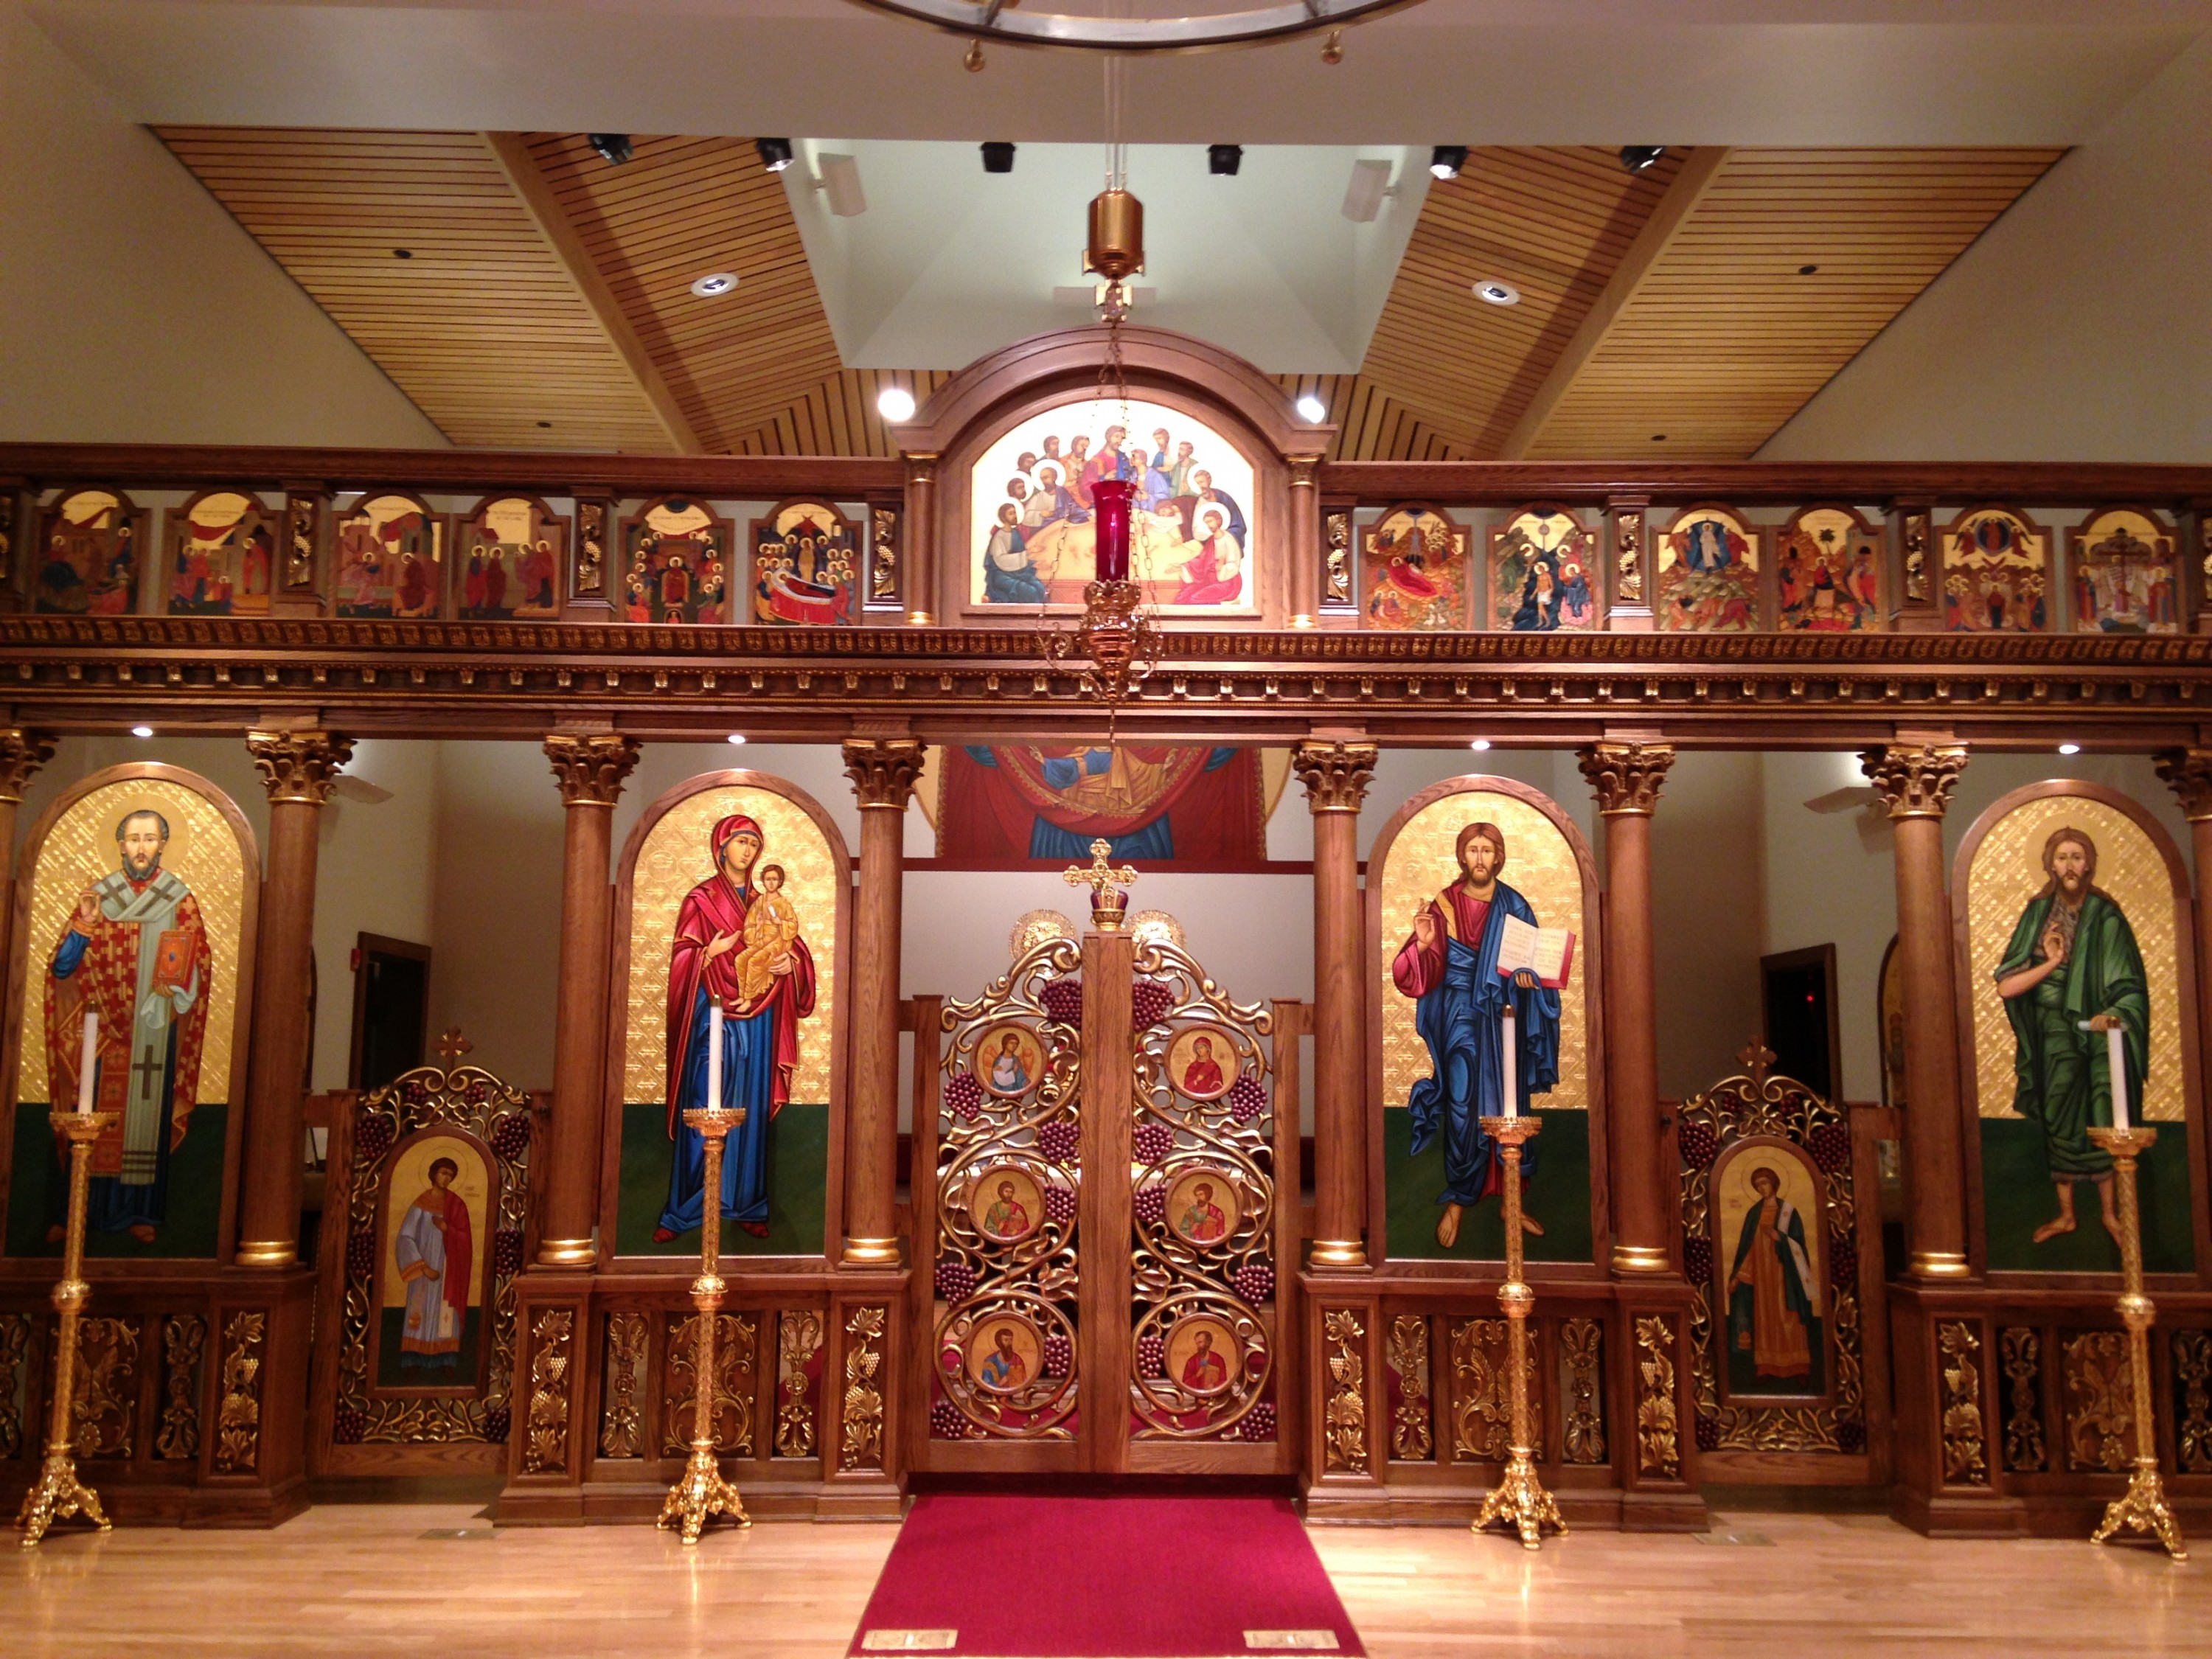 Interior of Epiphany of Our Lord, Annandale, VA